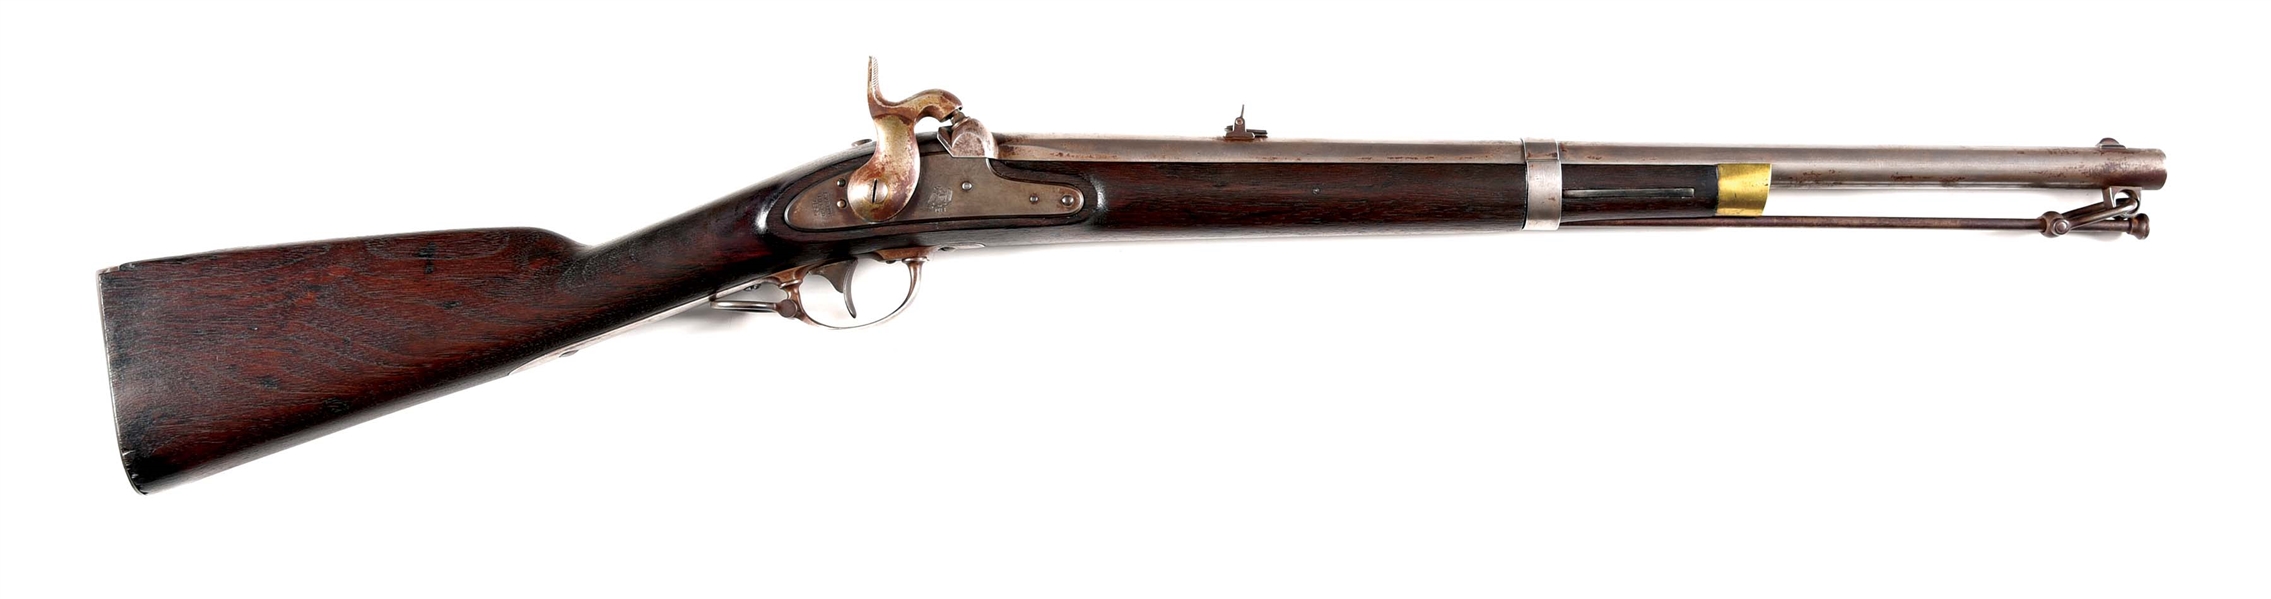 (A) RARE AND DESIRABLE US SPRINGFIELD MODEL 1855 PERCUSSION CAVALRY CARBINE DATED 1855.